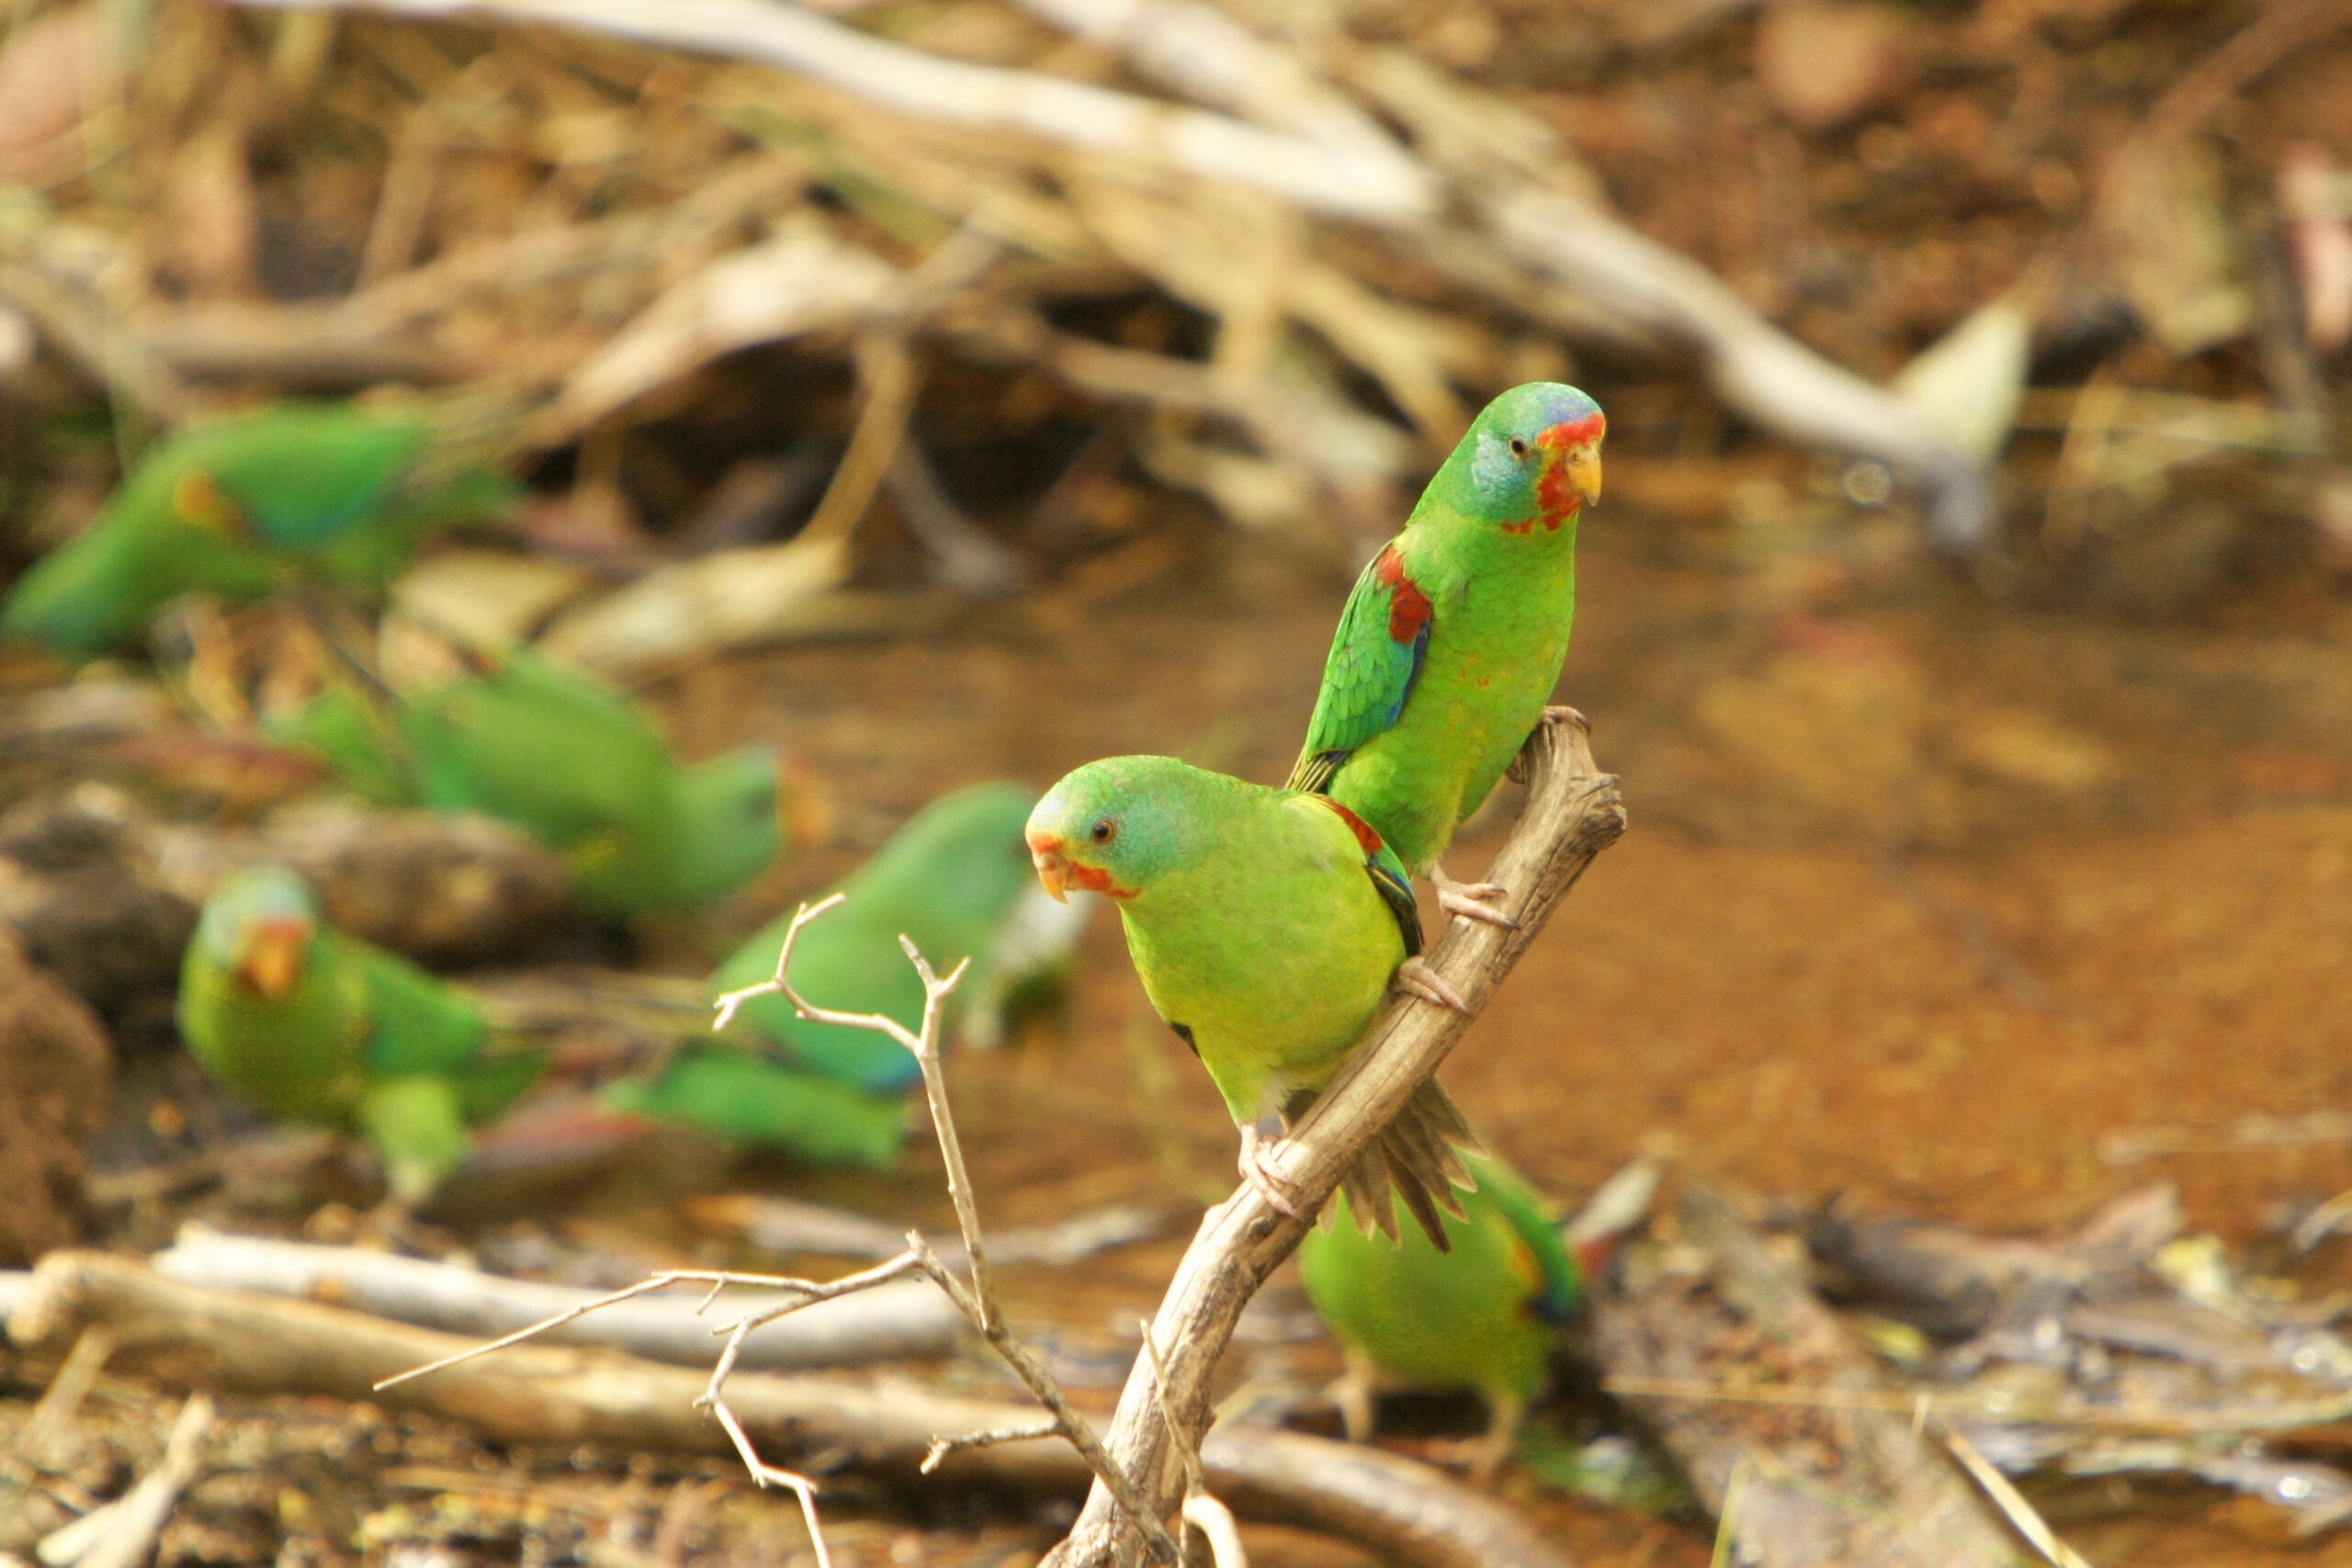 two green swift parrots sitting on a branch with more birds in the background